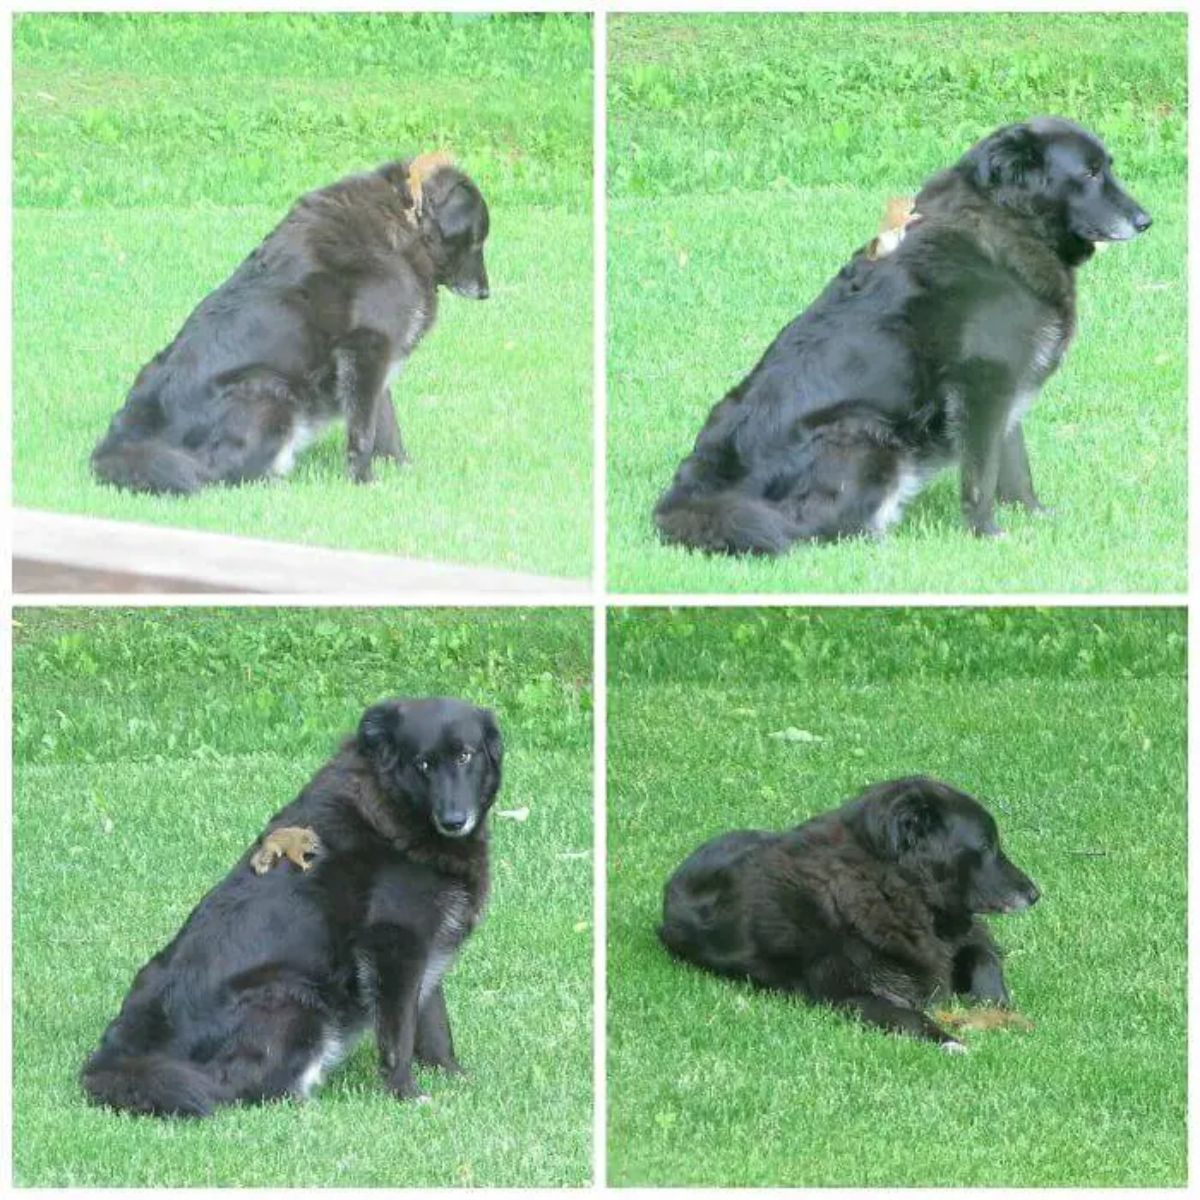 3 photos of a black fluffy dog sitting on grass with a baby squirrel on its head and back and 1 photo of the dog laying down with the squirrel in front